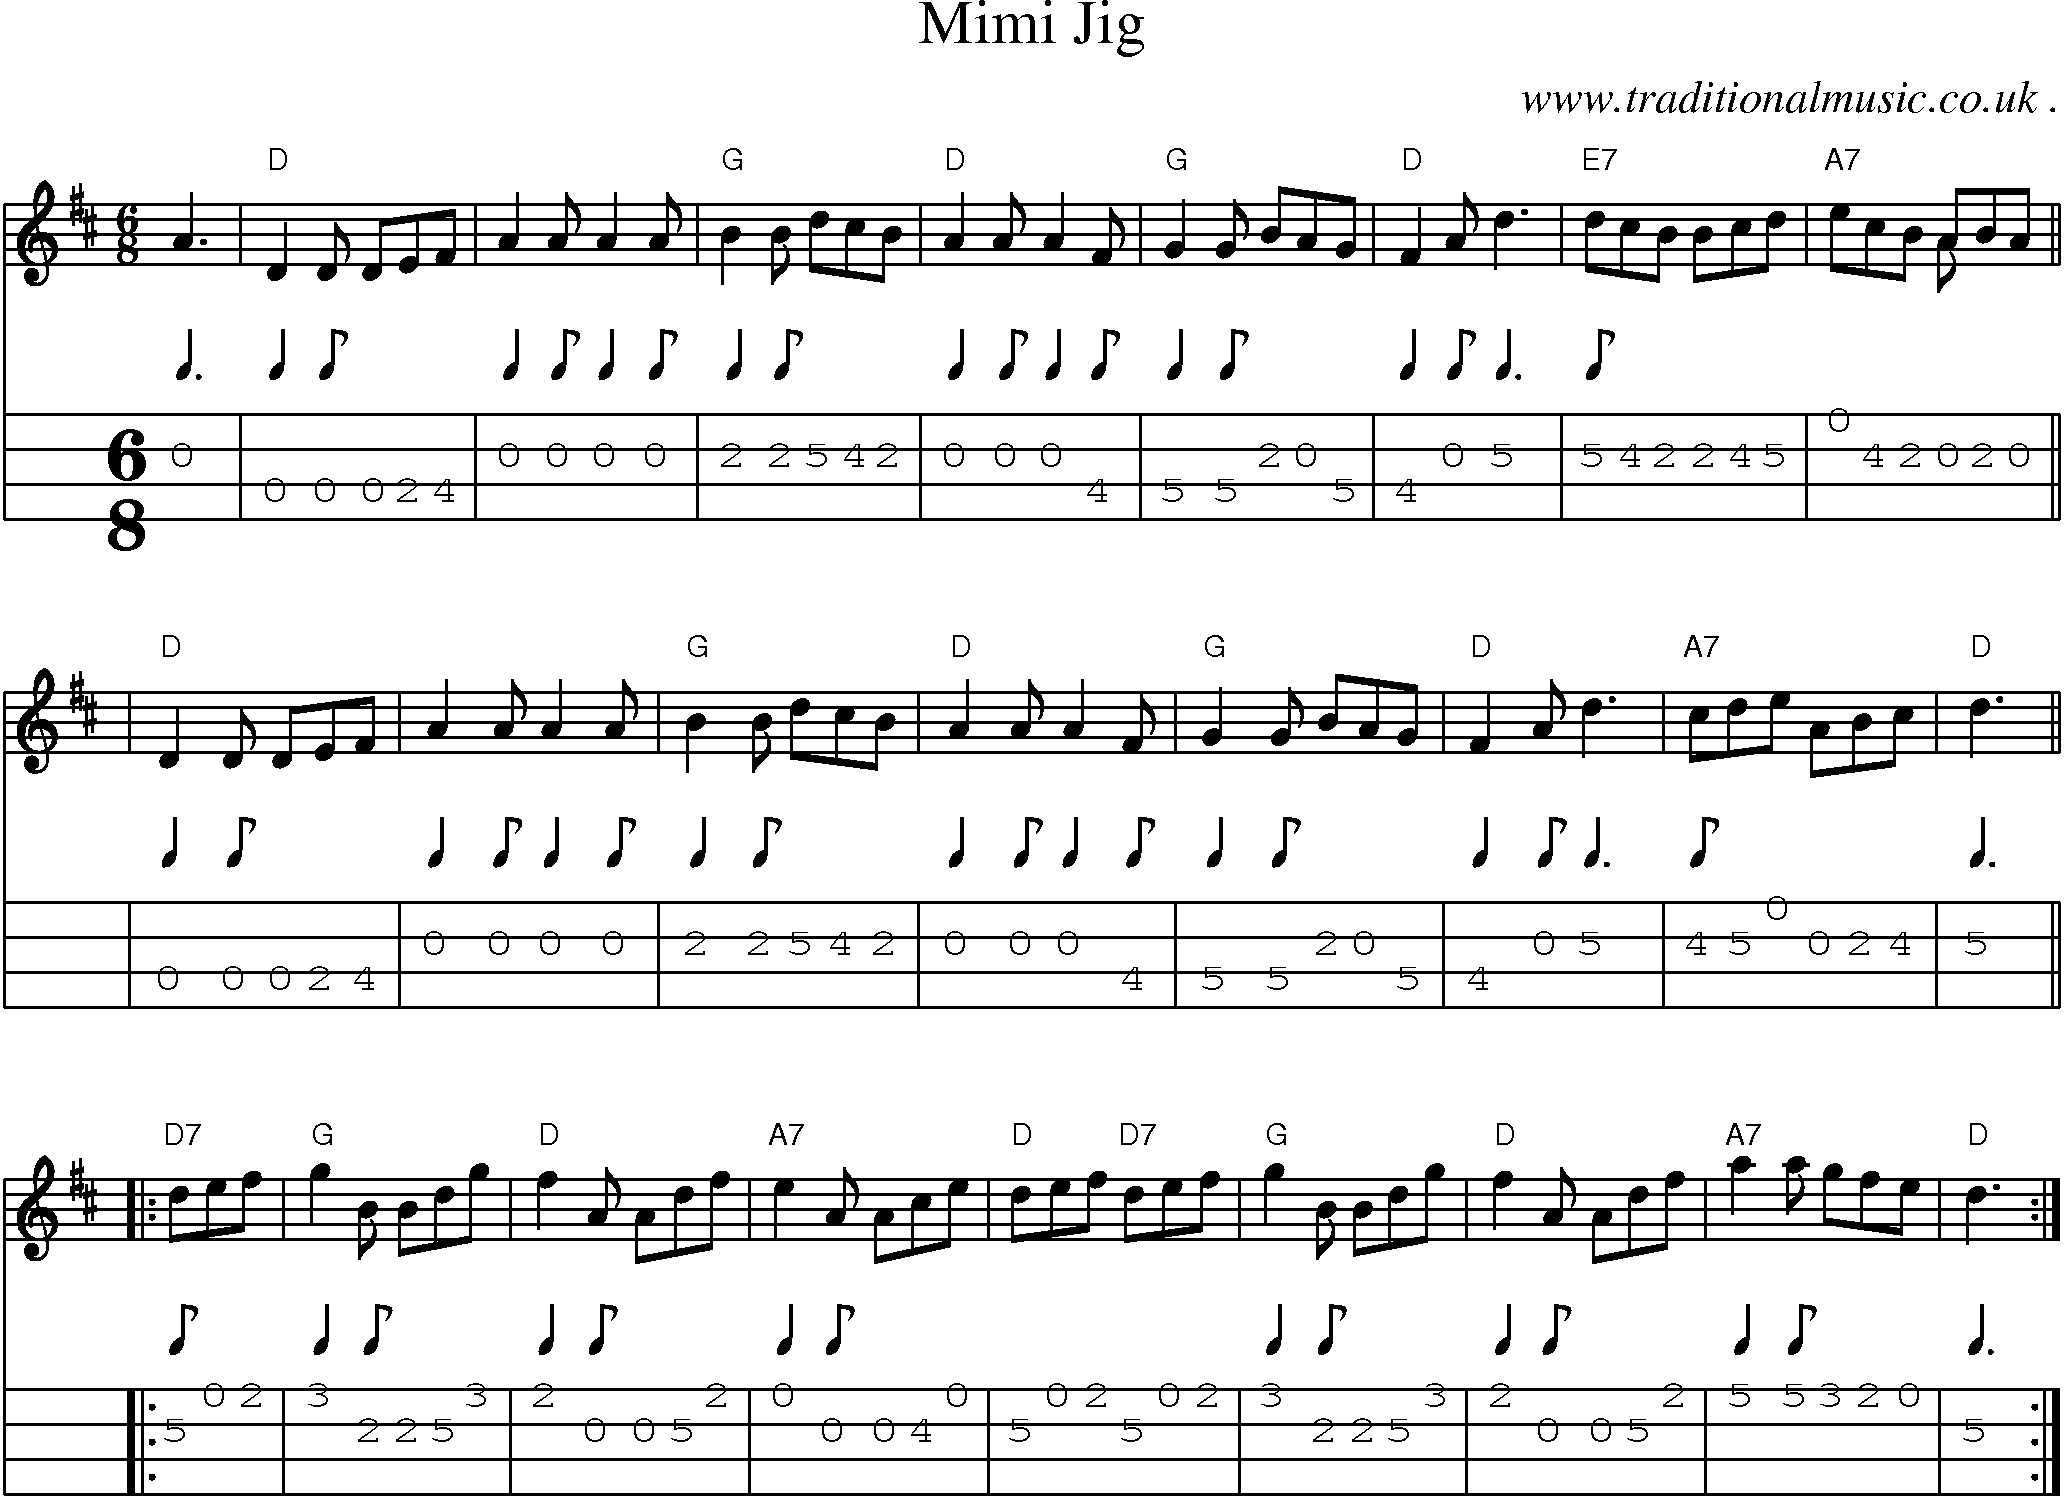 Sheet-music  score, Chords and Mandolin Tabs for Mimi Jig